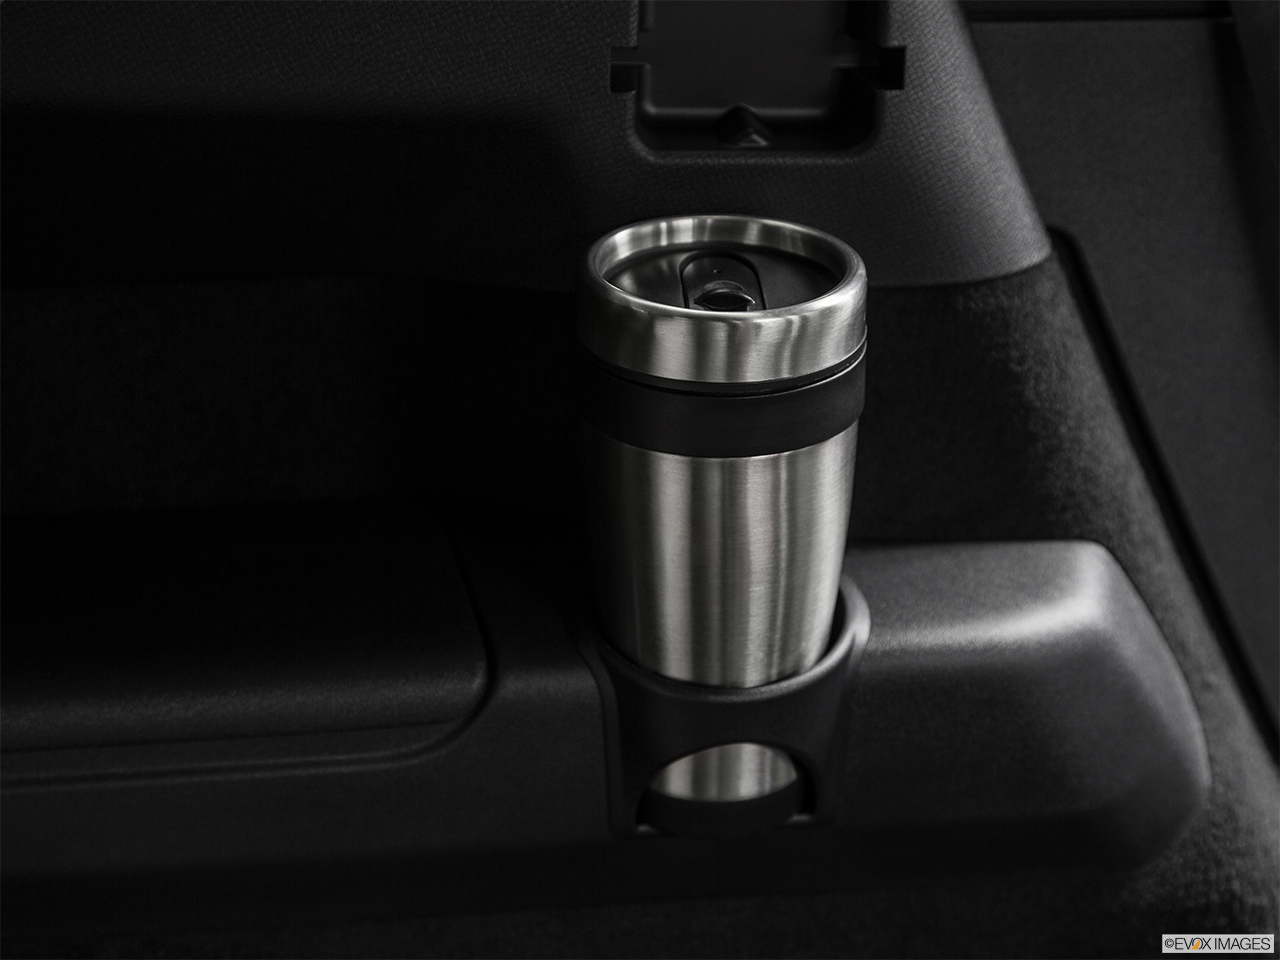 2017 Volvo XC90 T6 Momentum Third Row side cup holder with coffee prop. 